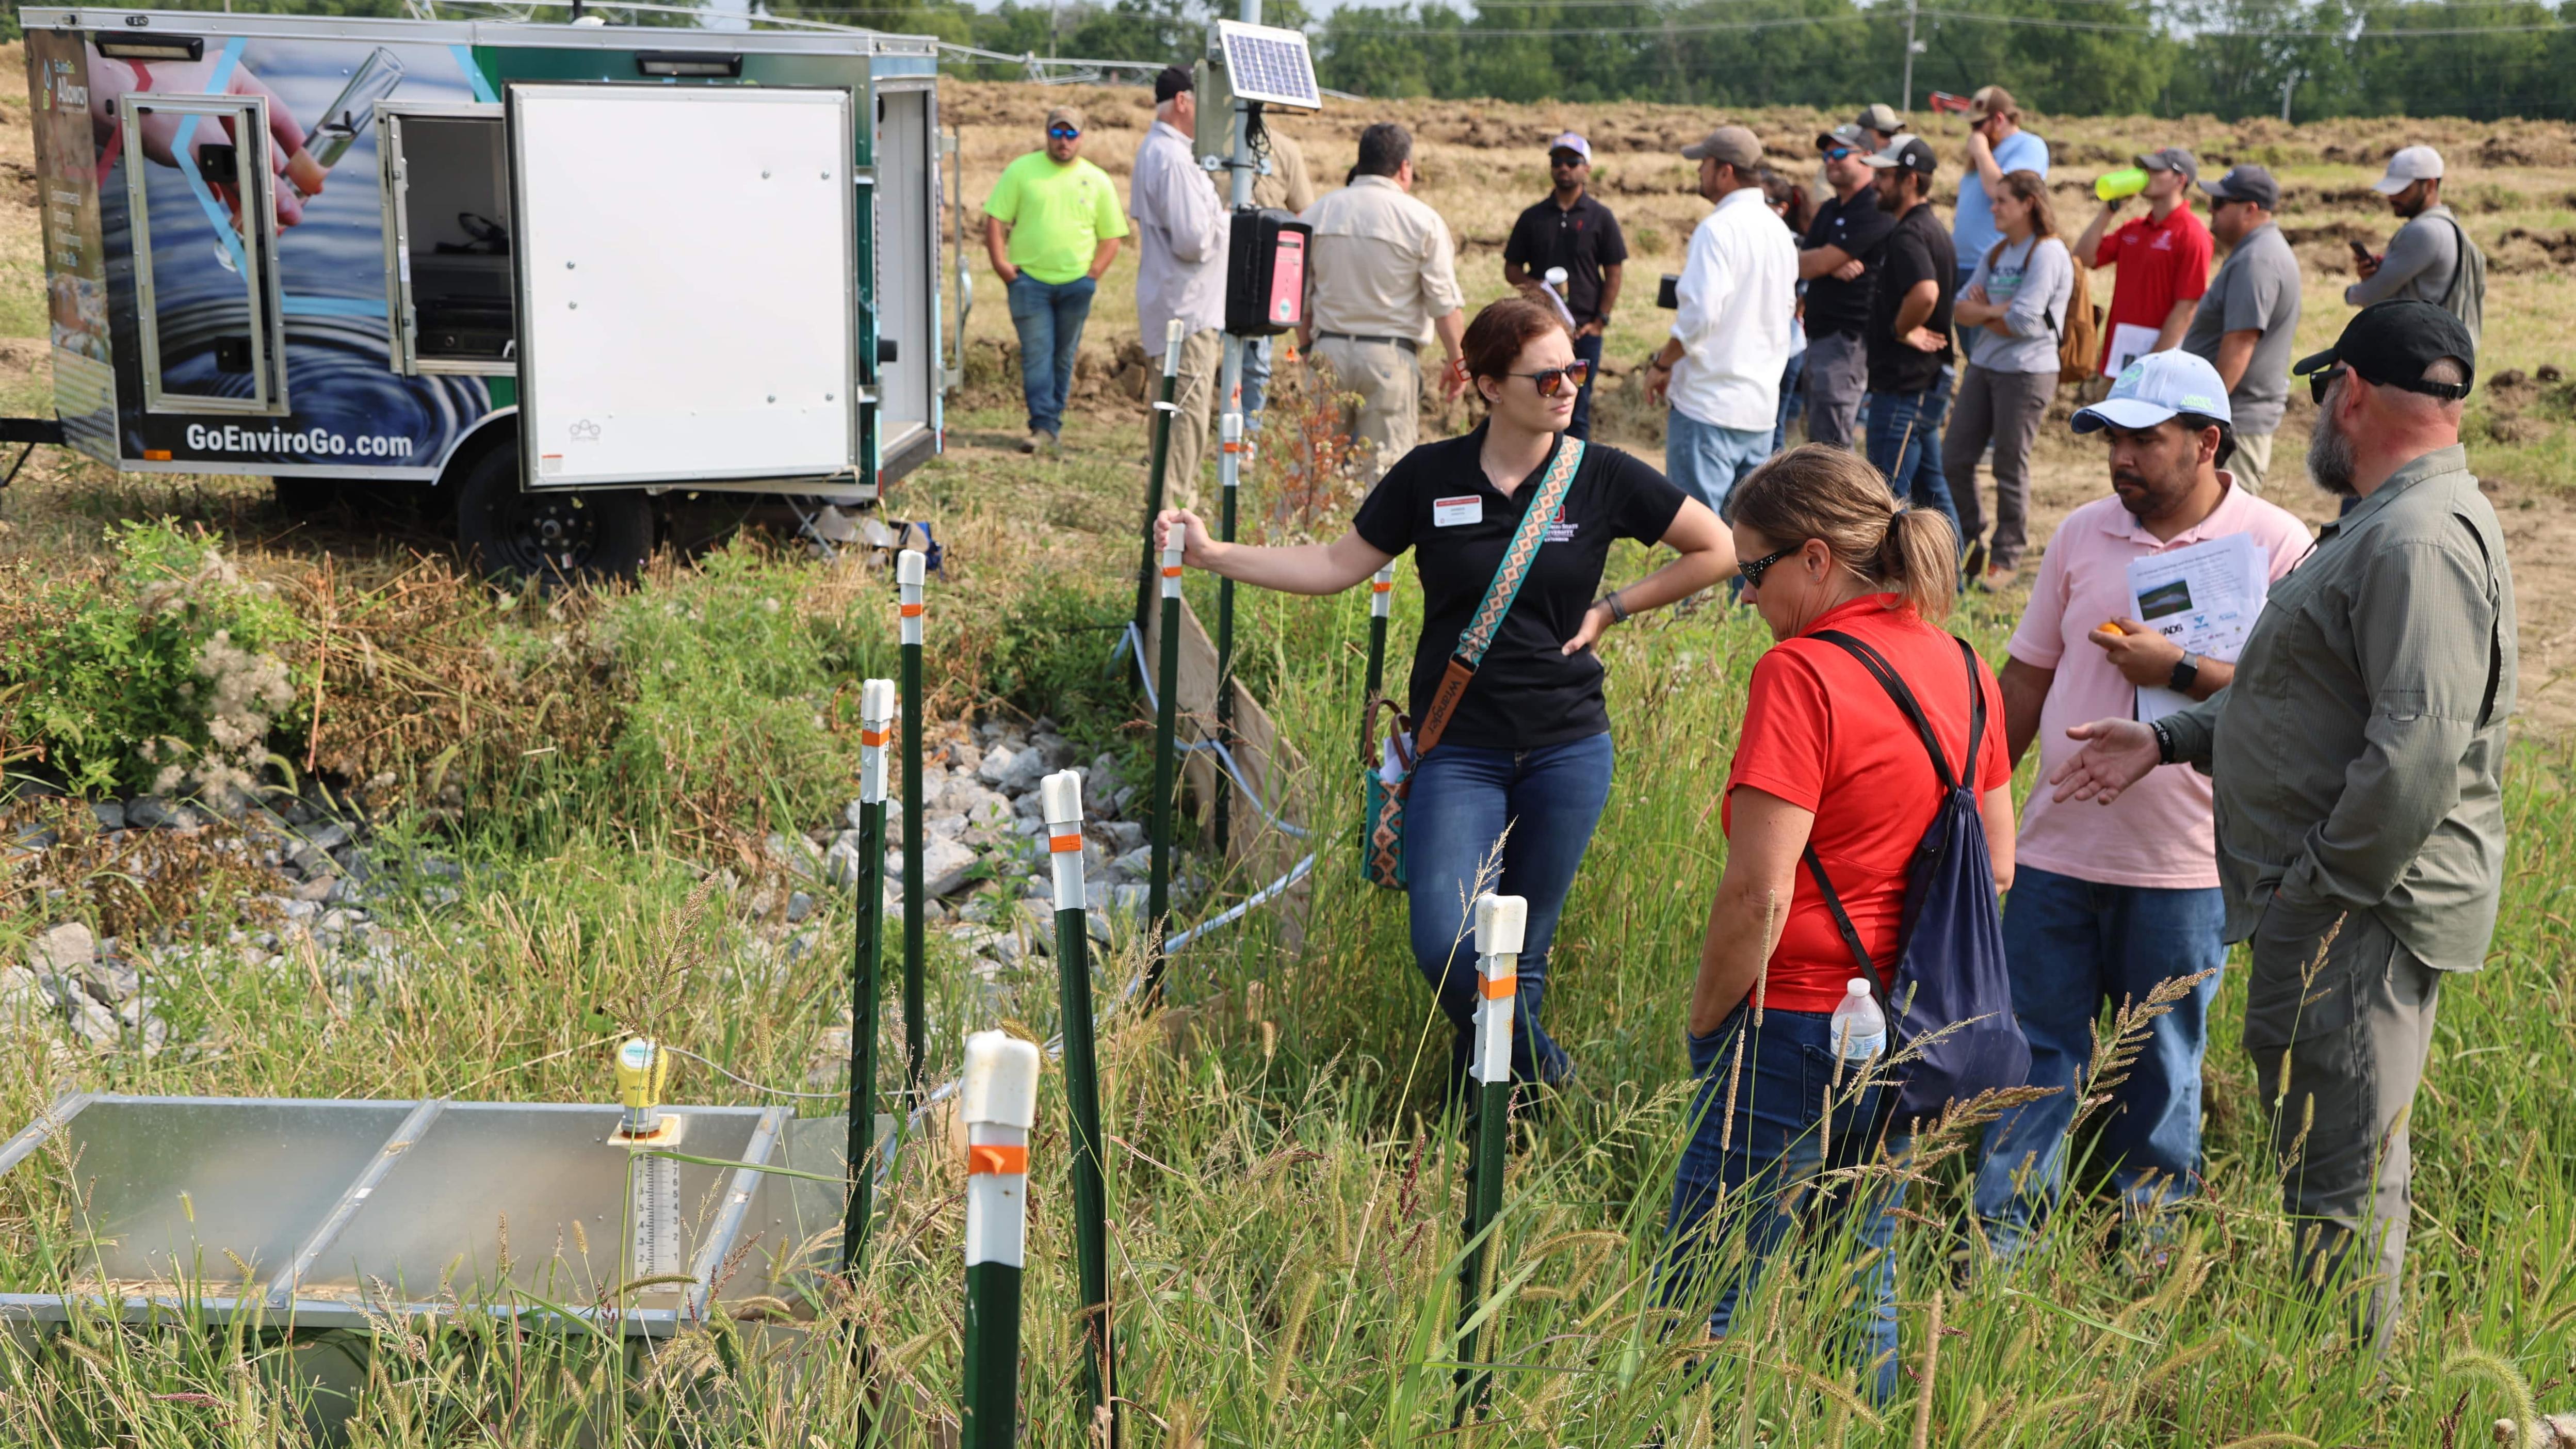 Participants examine water input systems